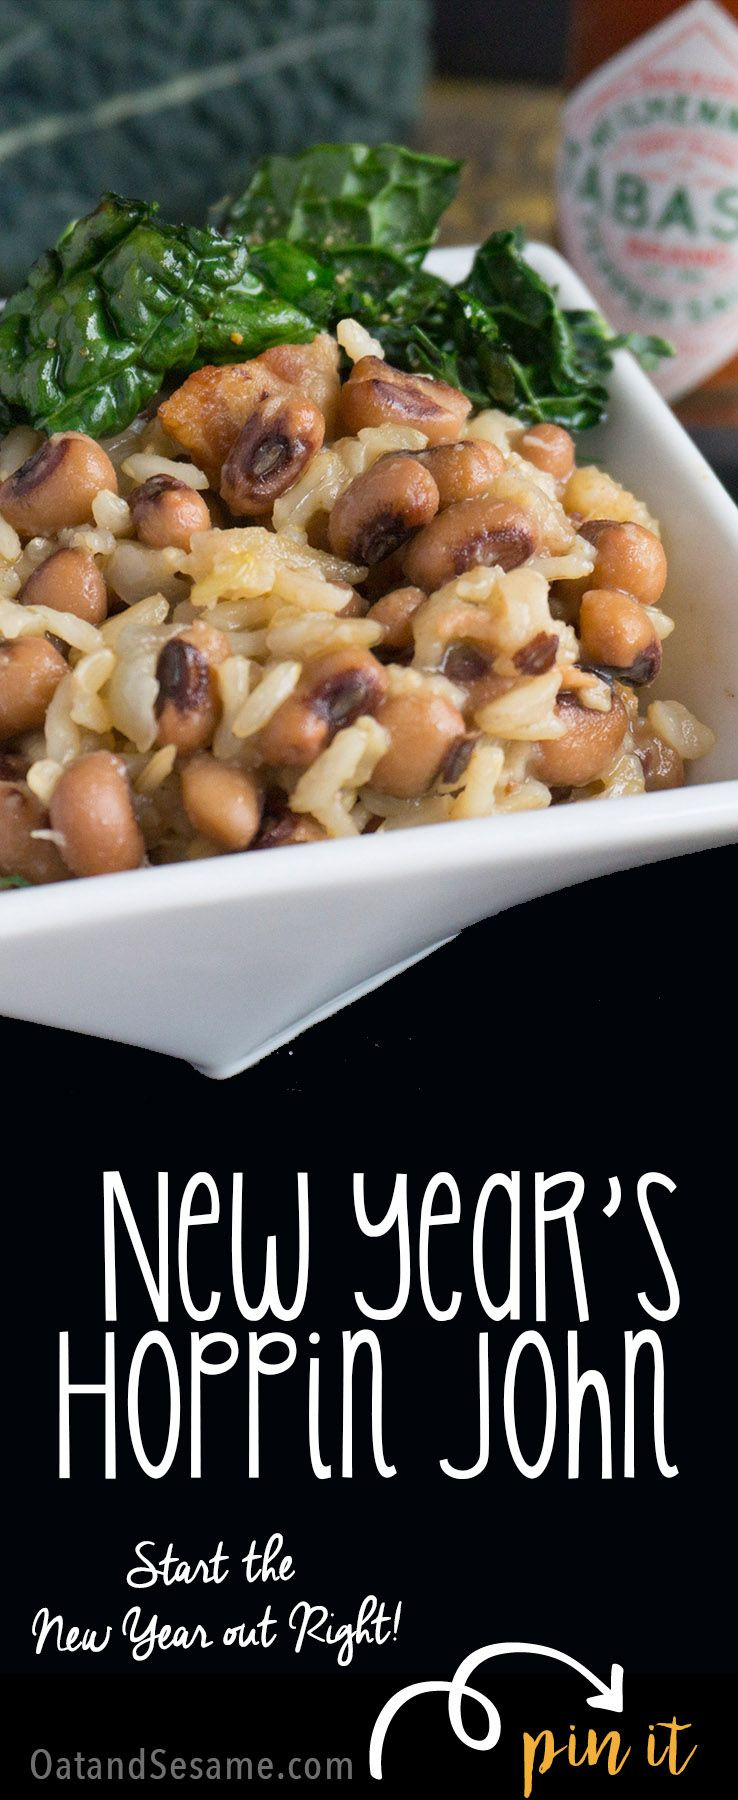 New Year Day Dinner Recipes
 Skillet Hoppin John Southern Black Eyed Peas and Rice